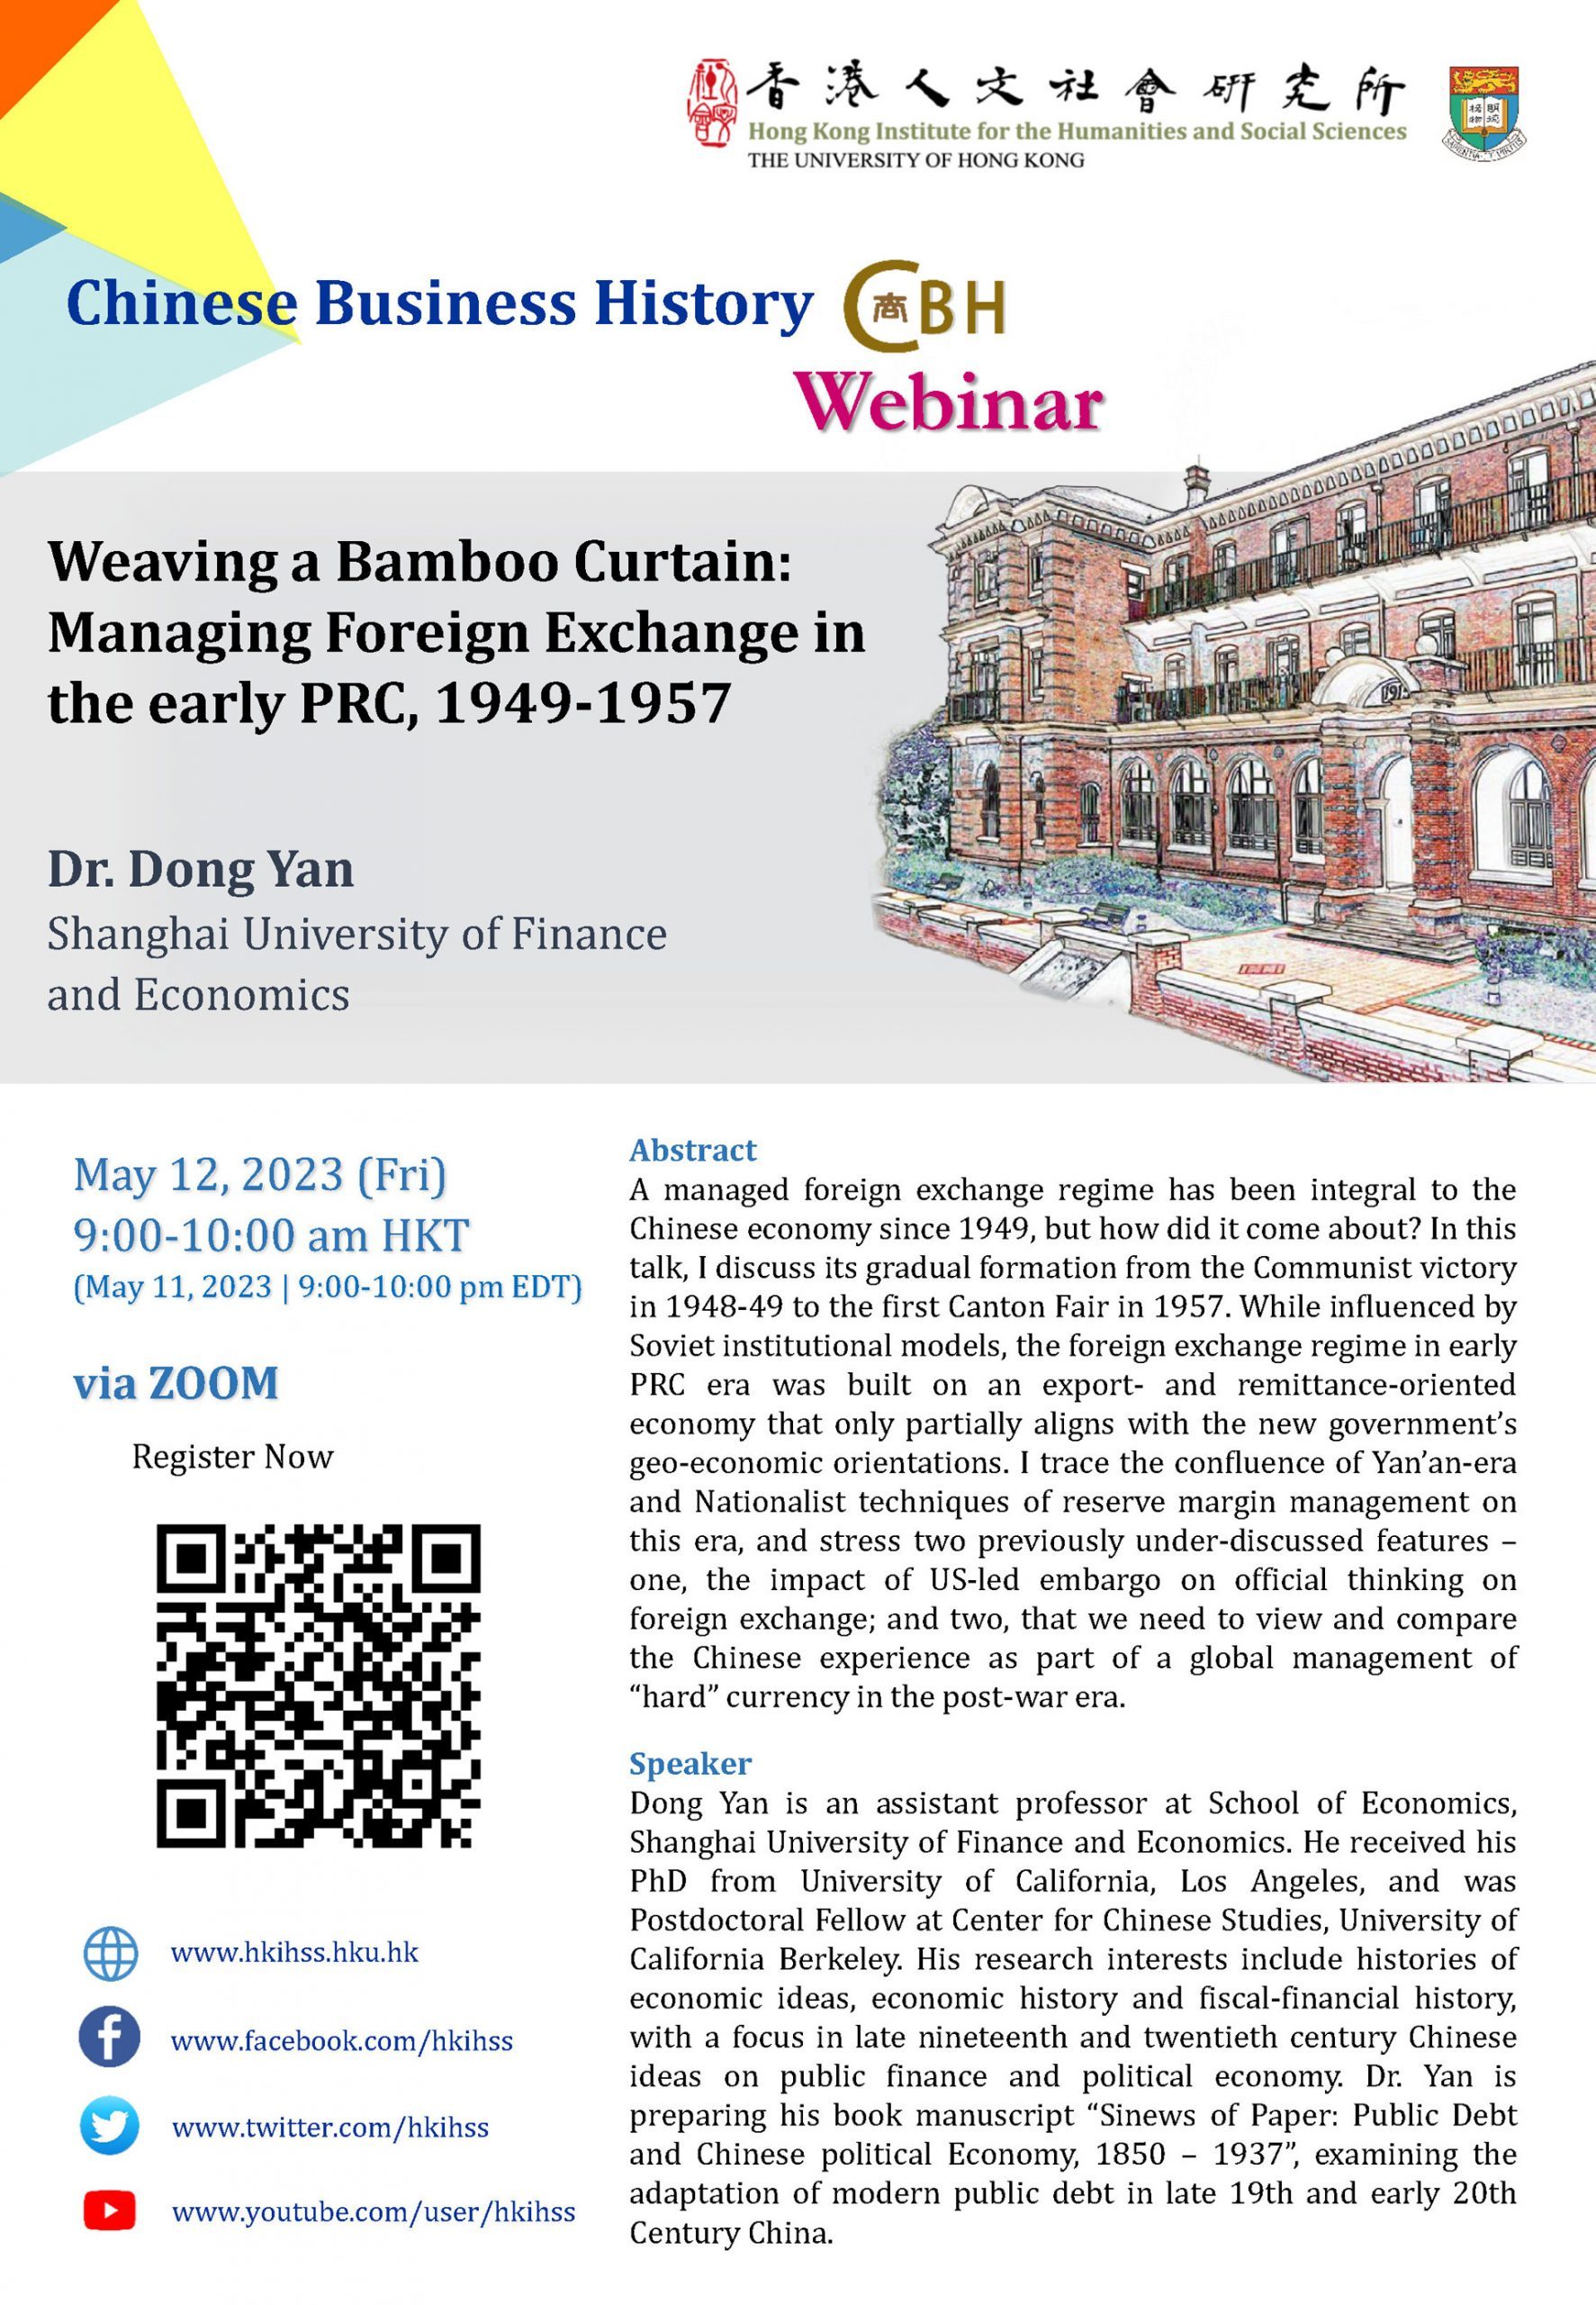 Chinese Business History Webinar on “Weaving a Bamboo Curtain: Managing Foreign Exchange in the early PRC, 1949 - 1957” by Dr. Dong Yan (May 12, 2023)